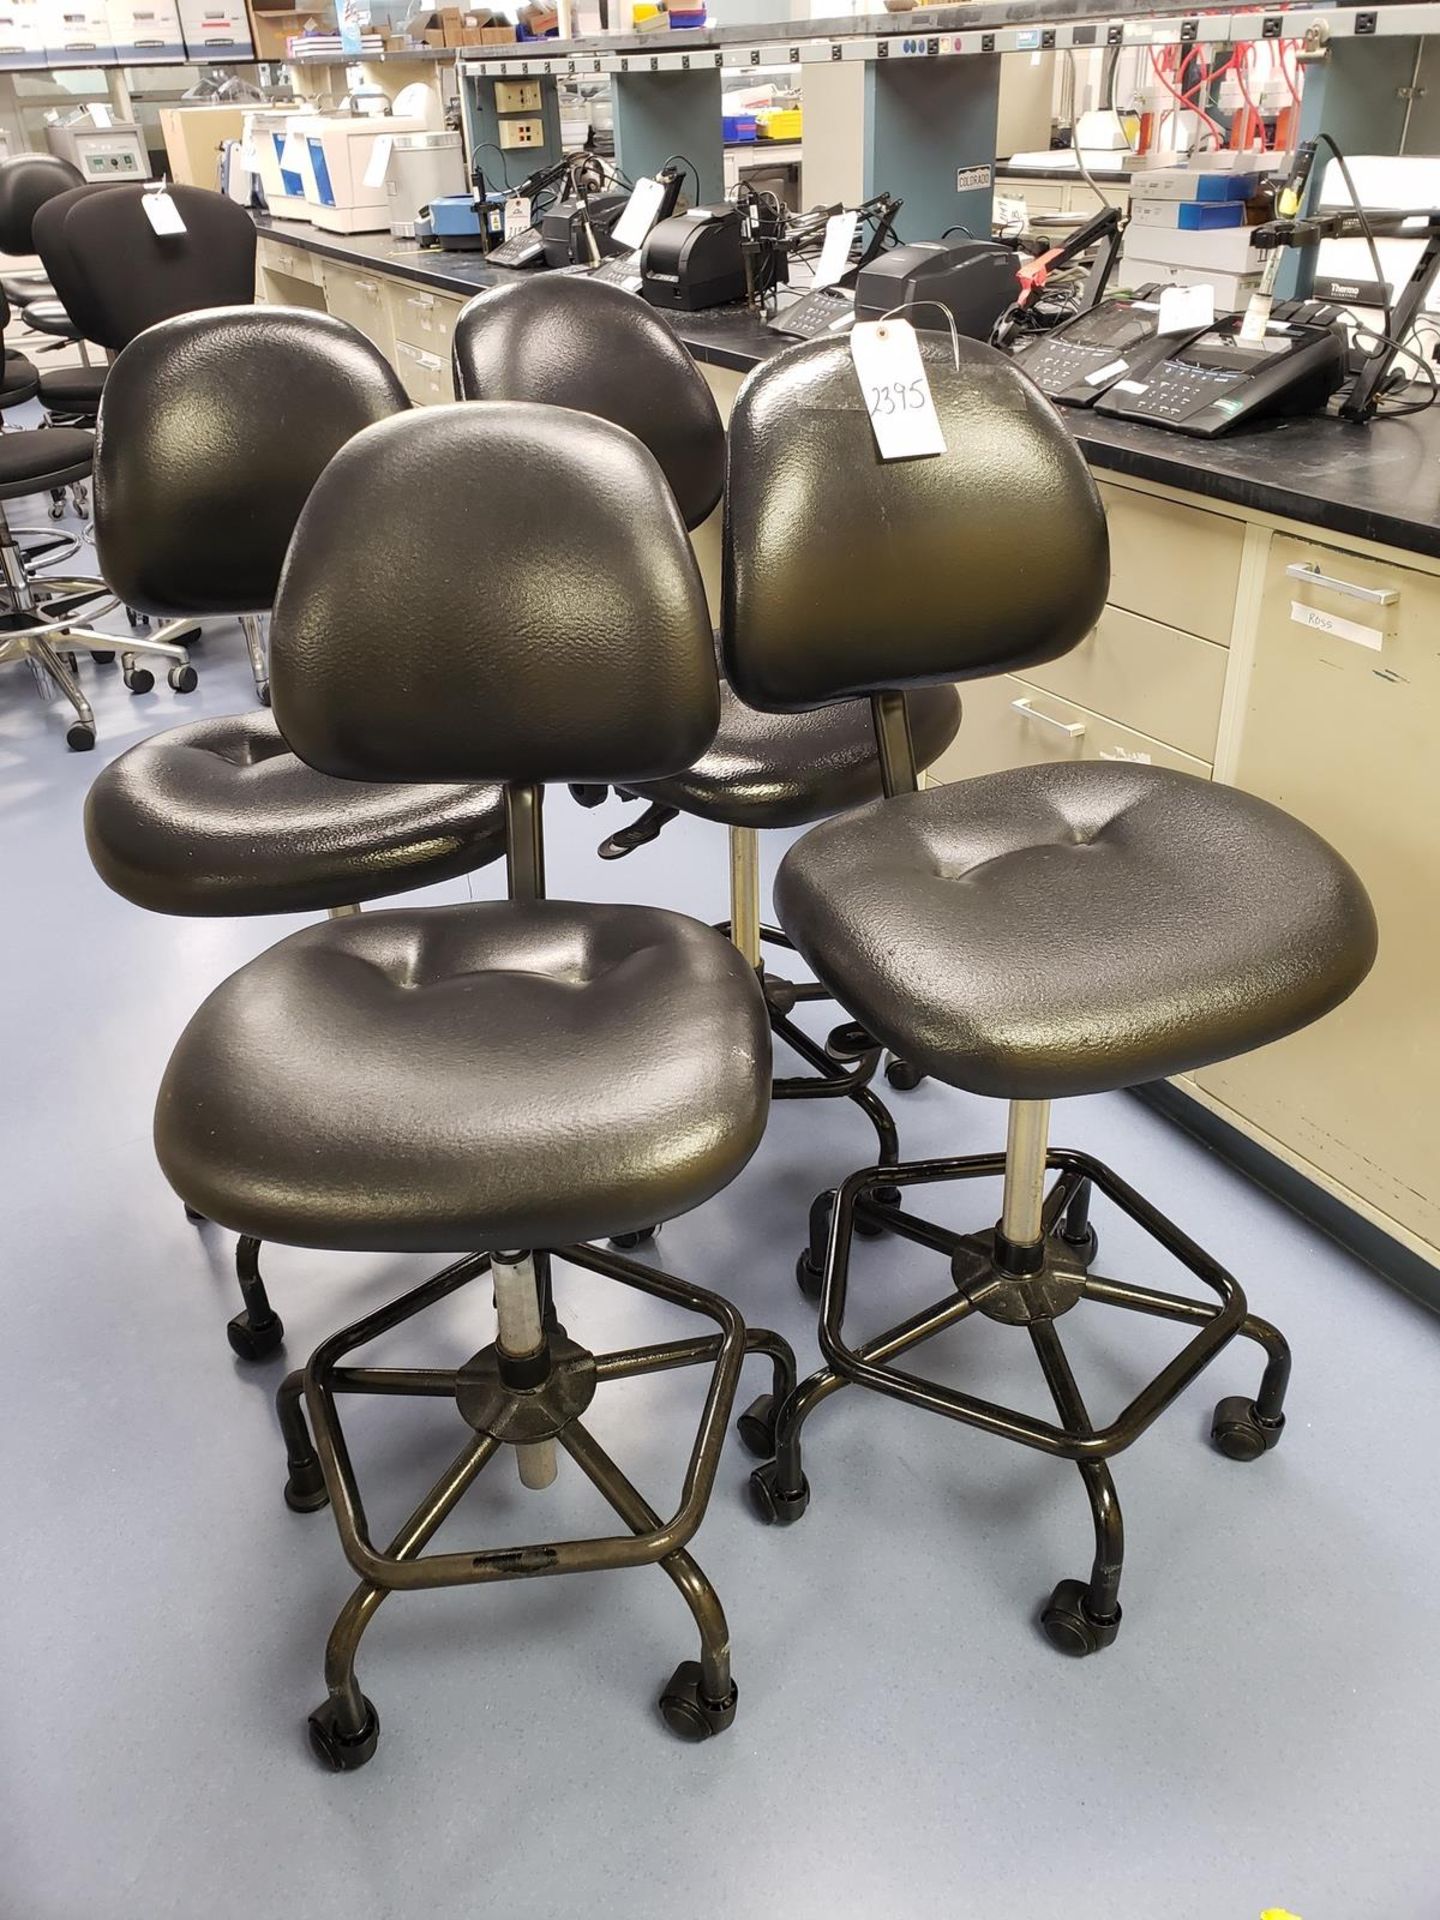 Lot of (4) Laboratory Chairs | Rig Fee $25